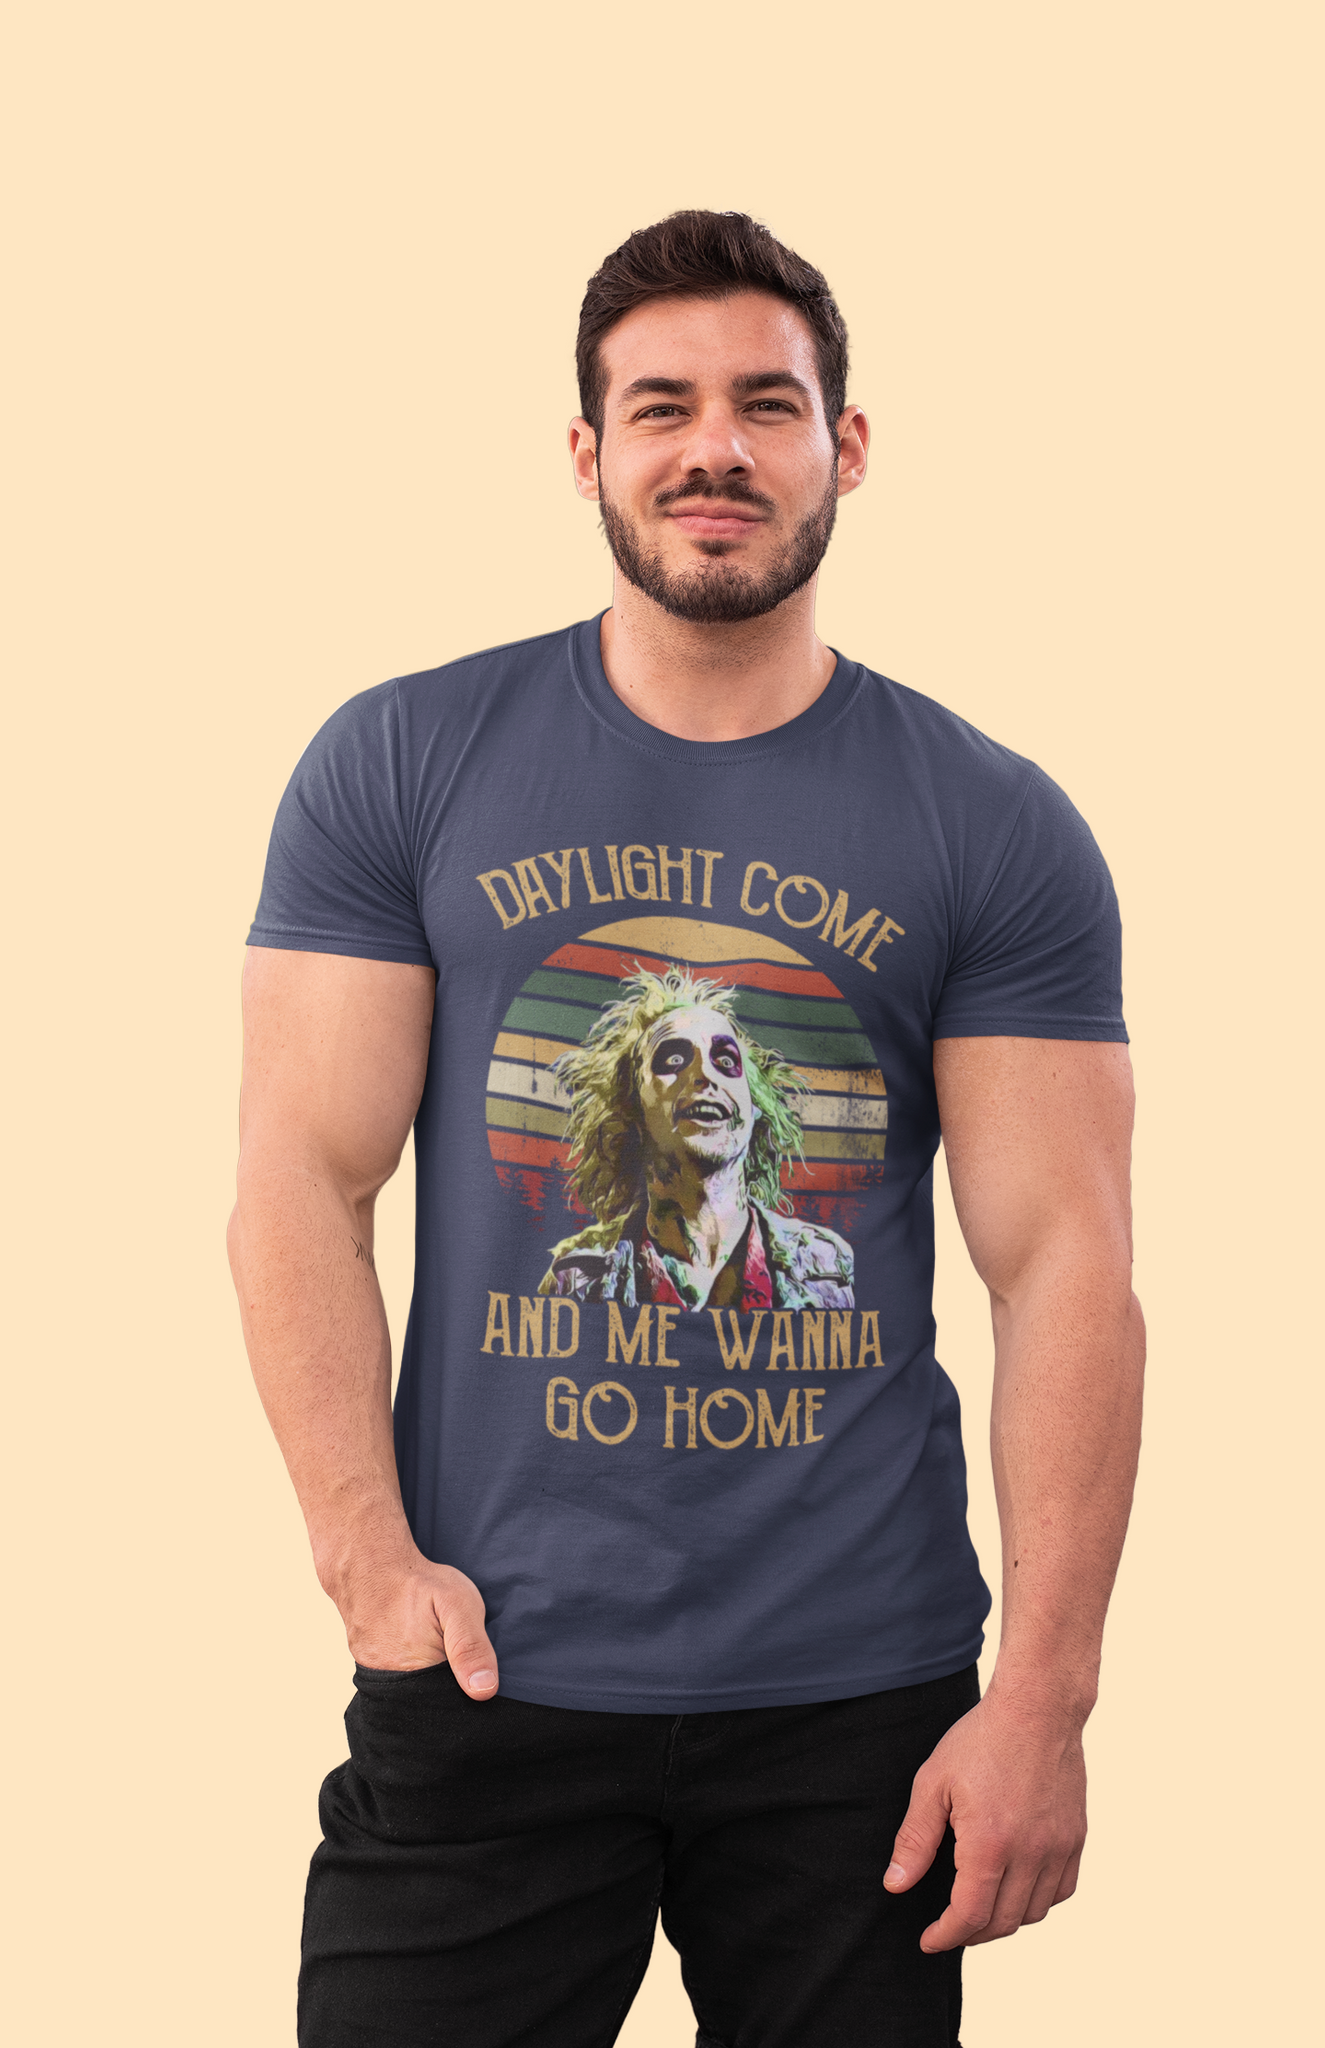 Beetlejuice Vintage T Shirt, Daylight Come And Me Wanna Go Home Tshirt, Halloween Gifts